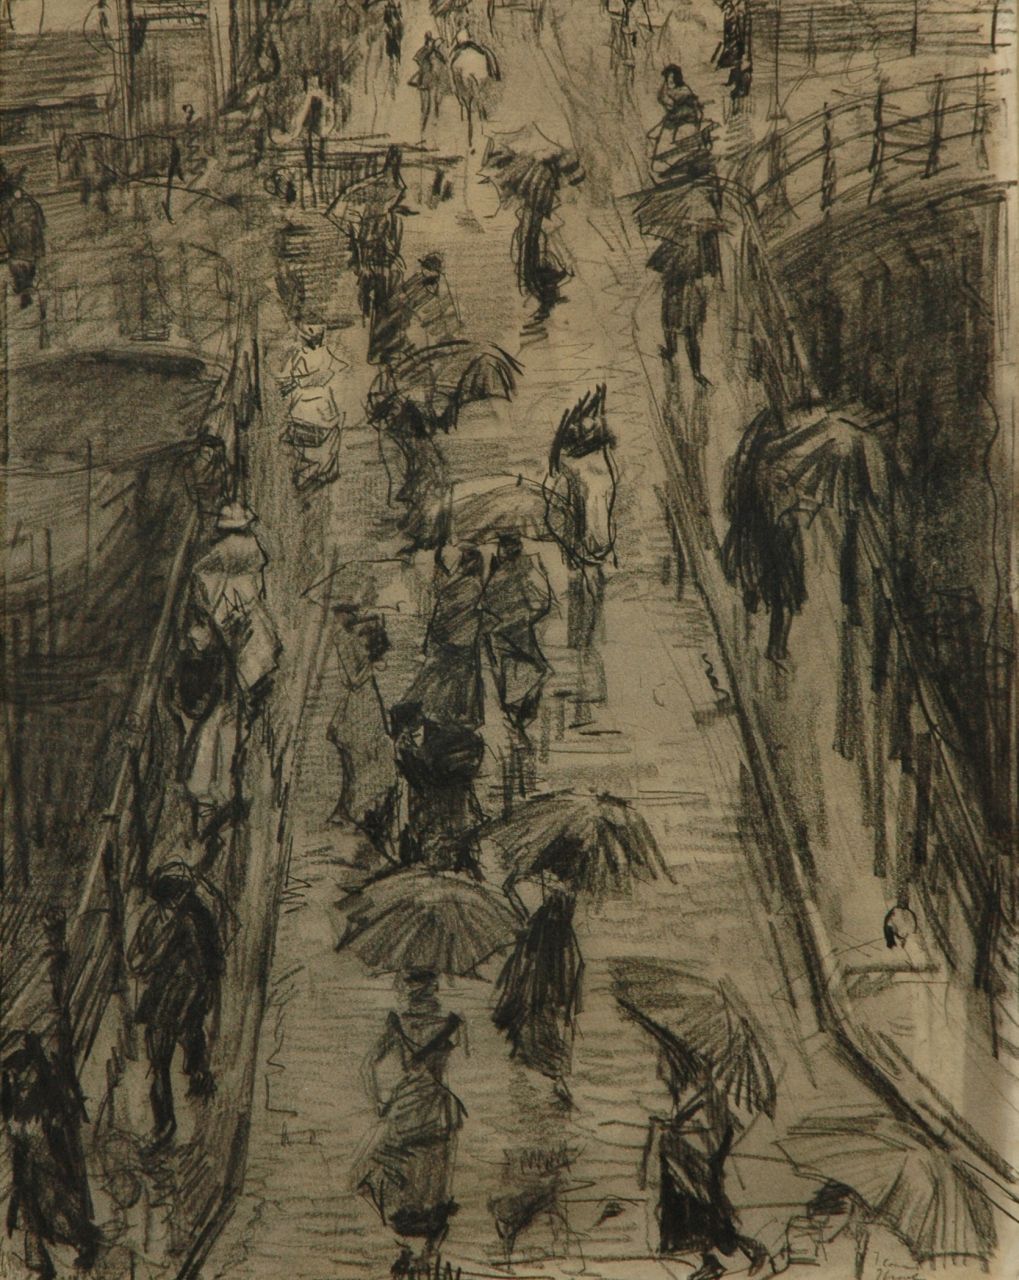 Israels I.L.  | 'Isaac' Lazarus Israels, Through the Rain; the Leliegracht in Amsterdam, Holzkohle und Kreide auf Papier 62,0 x 47,5 cm, signed l.r. en verso und Executed ca. 1890-1894